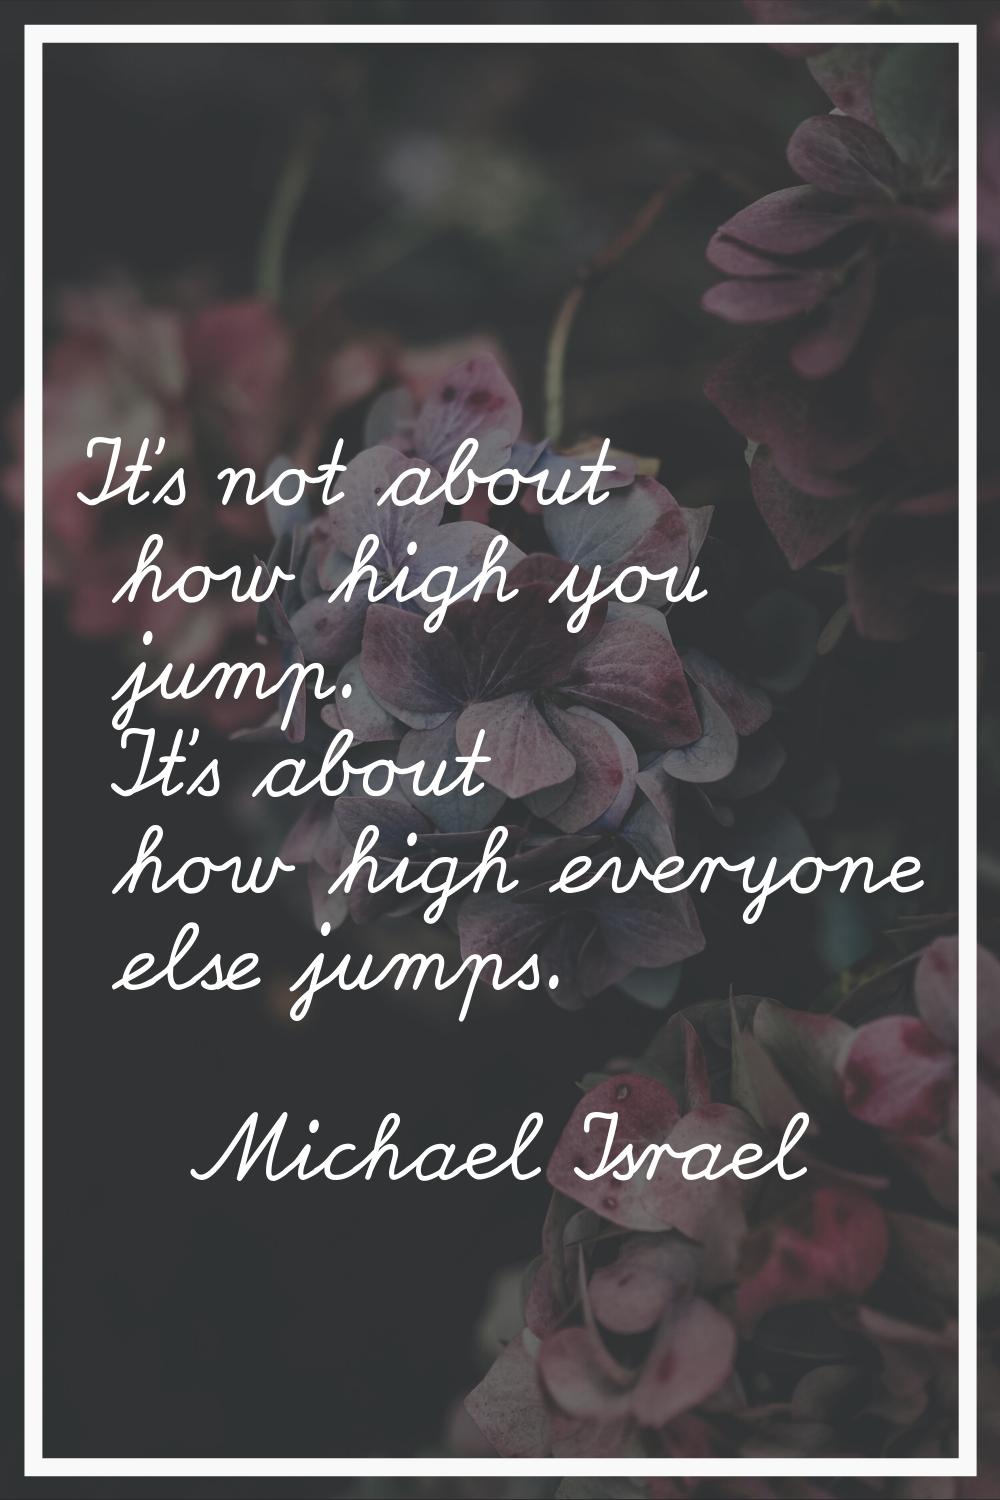 It's not about how high you jump. It's about how high everyone else jumps.